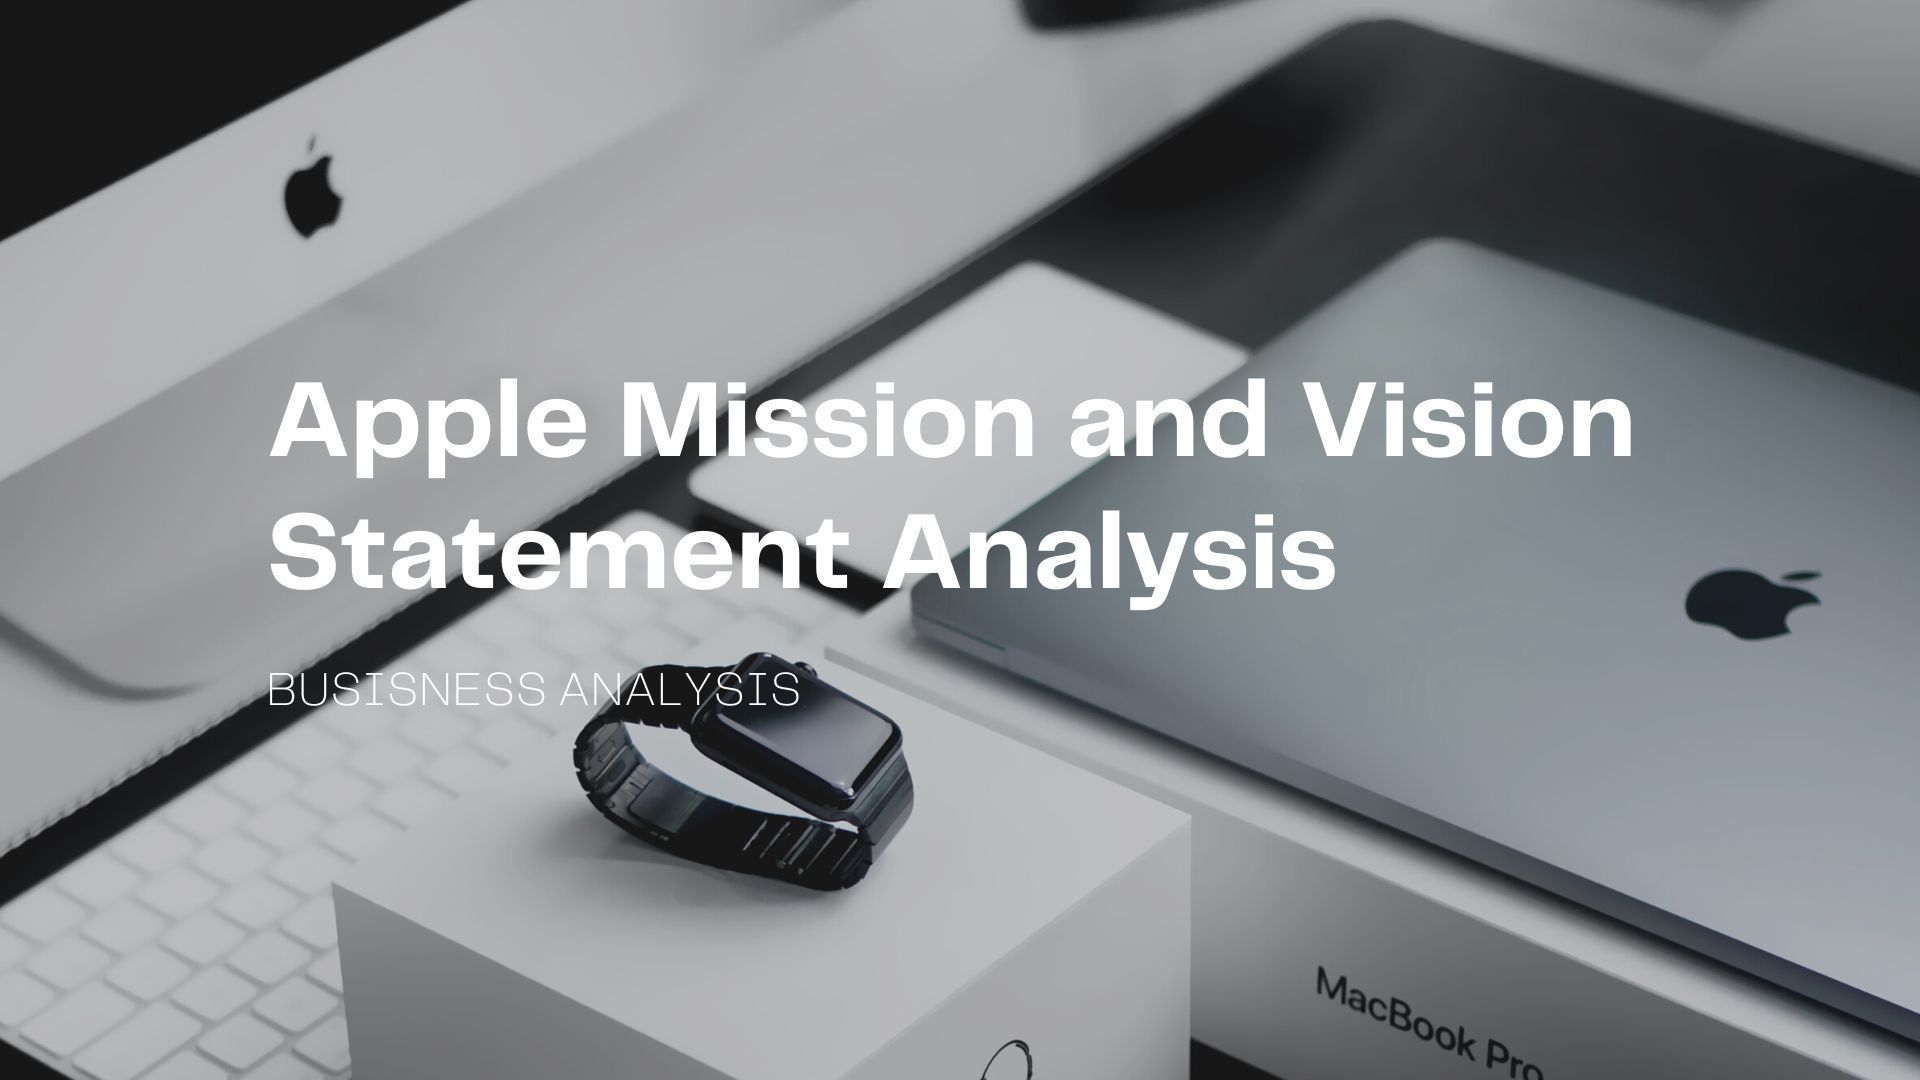 Apple Mission and Vision Statement Analysis.jpg